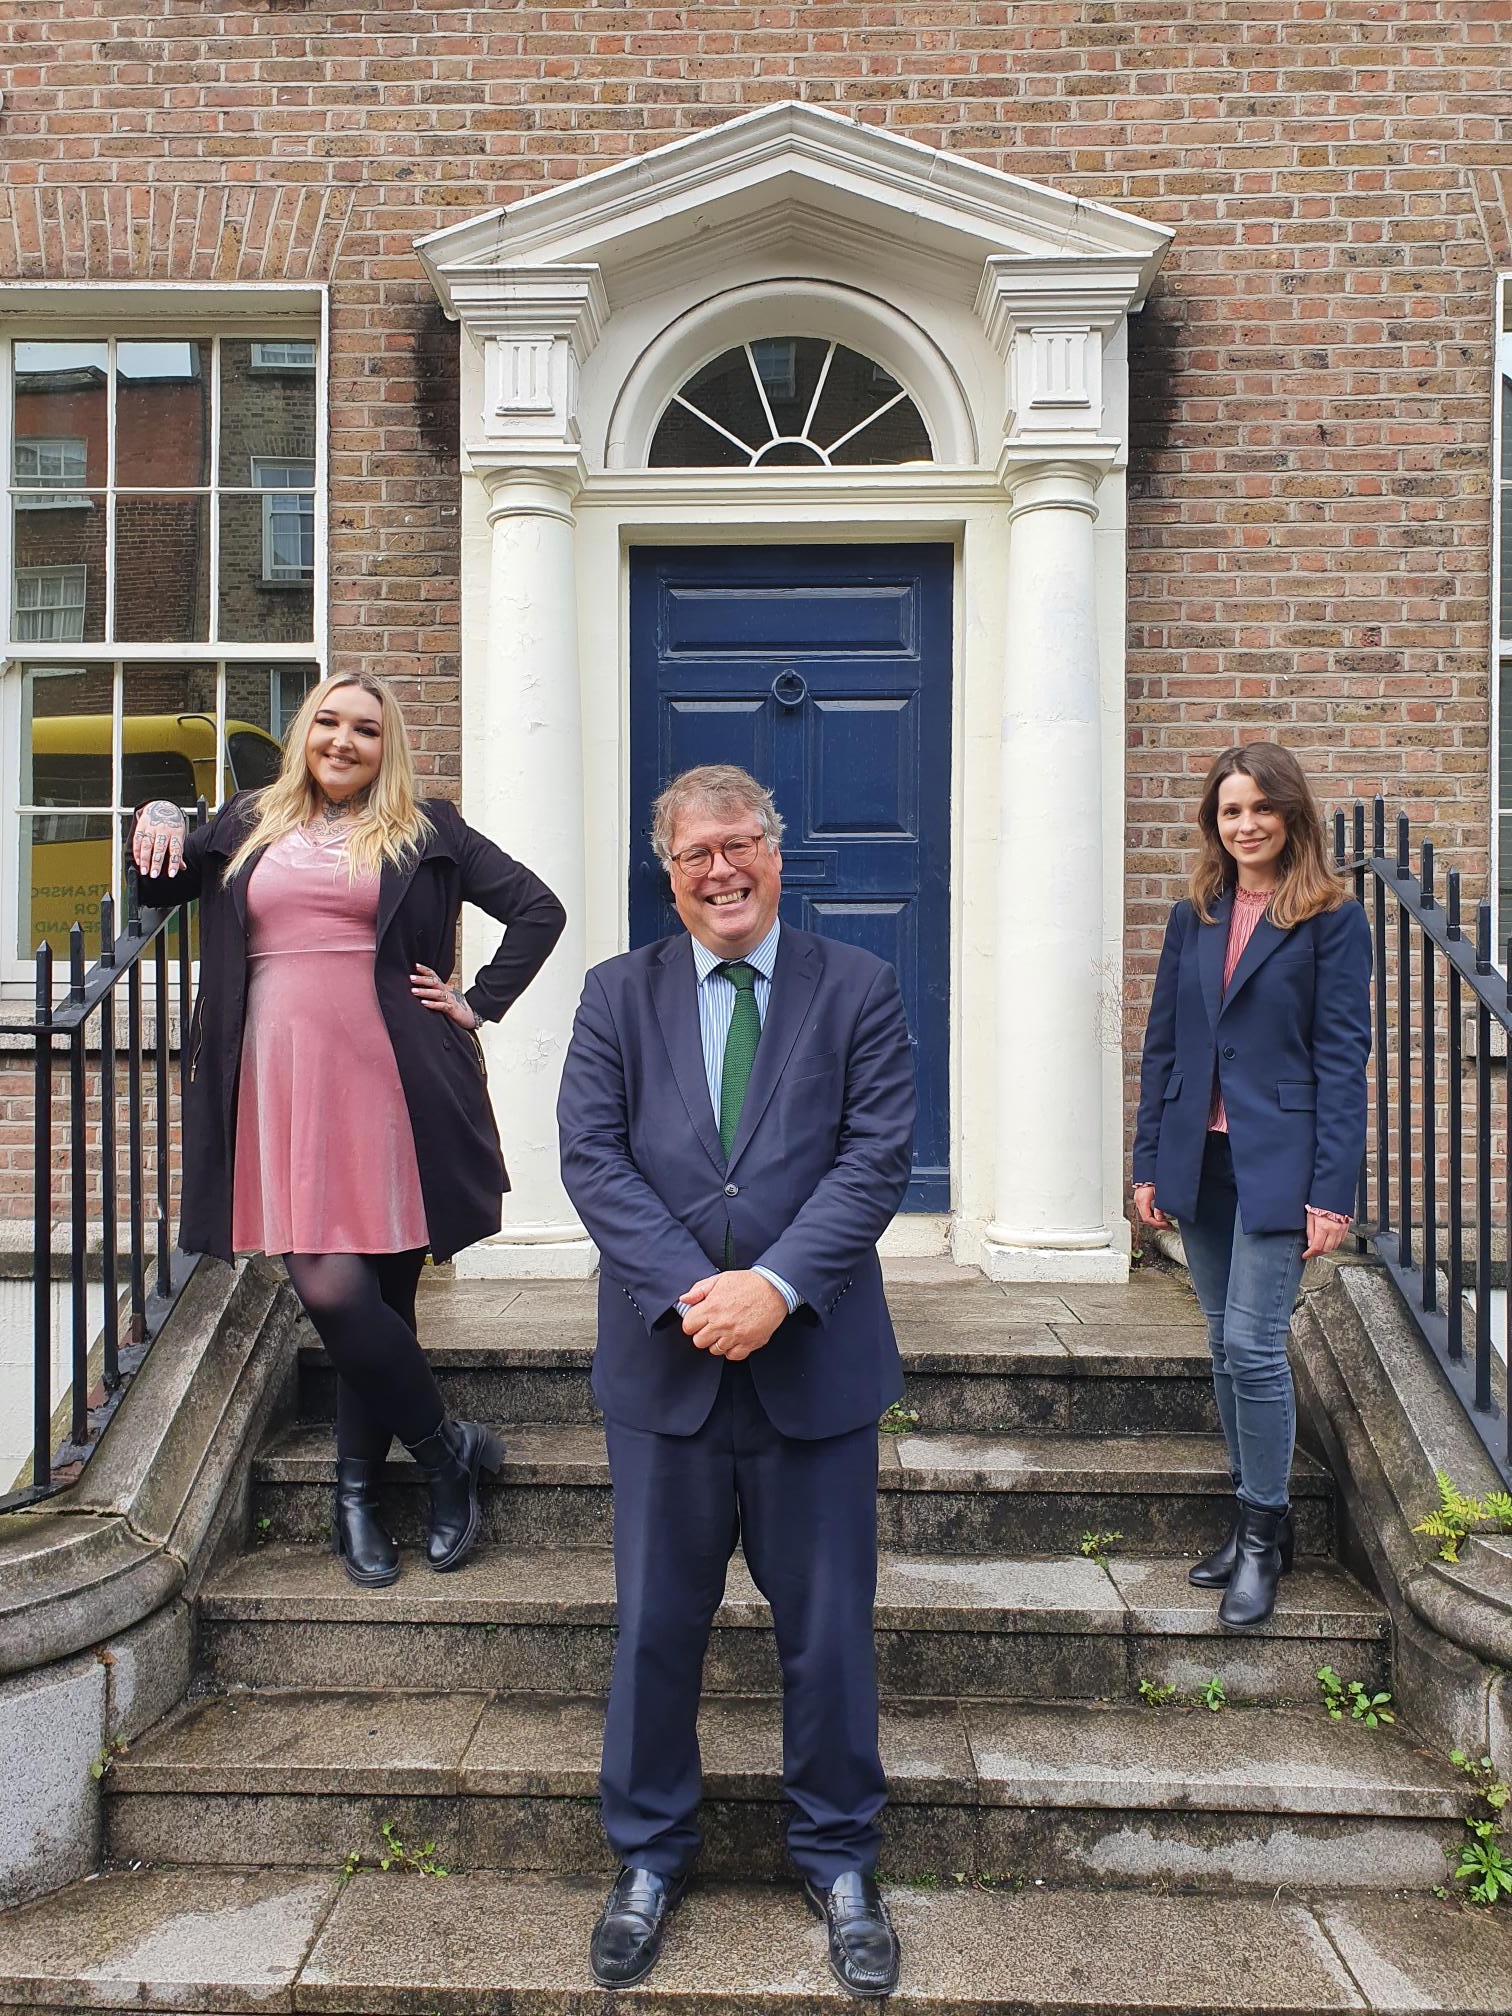 L-R-Colaiste-Dhulaigh-CFE-graduate-Julieanne-Doyle-with-Press-Council-Chairman-Rory-Montgomery-and-Laura-Klepeisz-of-DCU-pic-courtesy-of-Laura-Roche.jpg